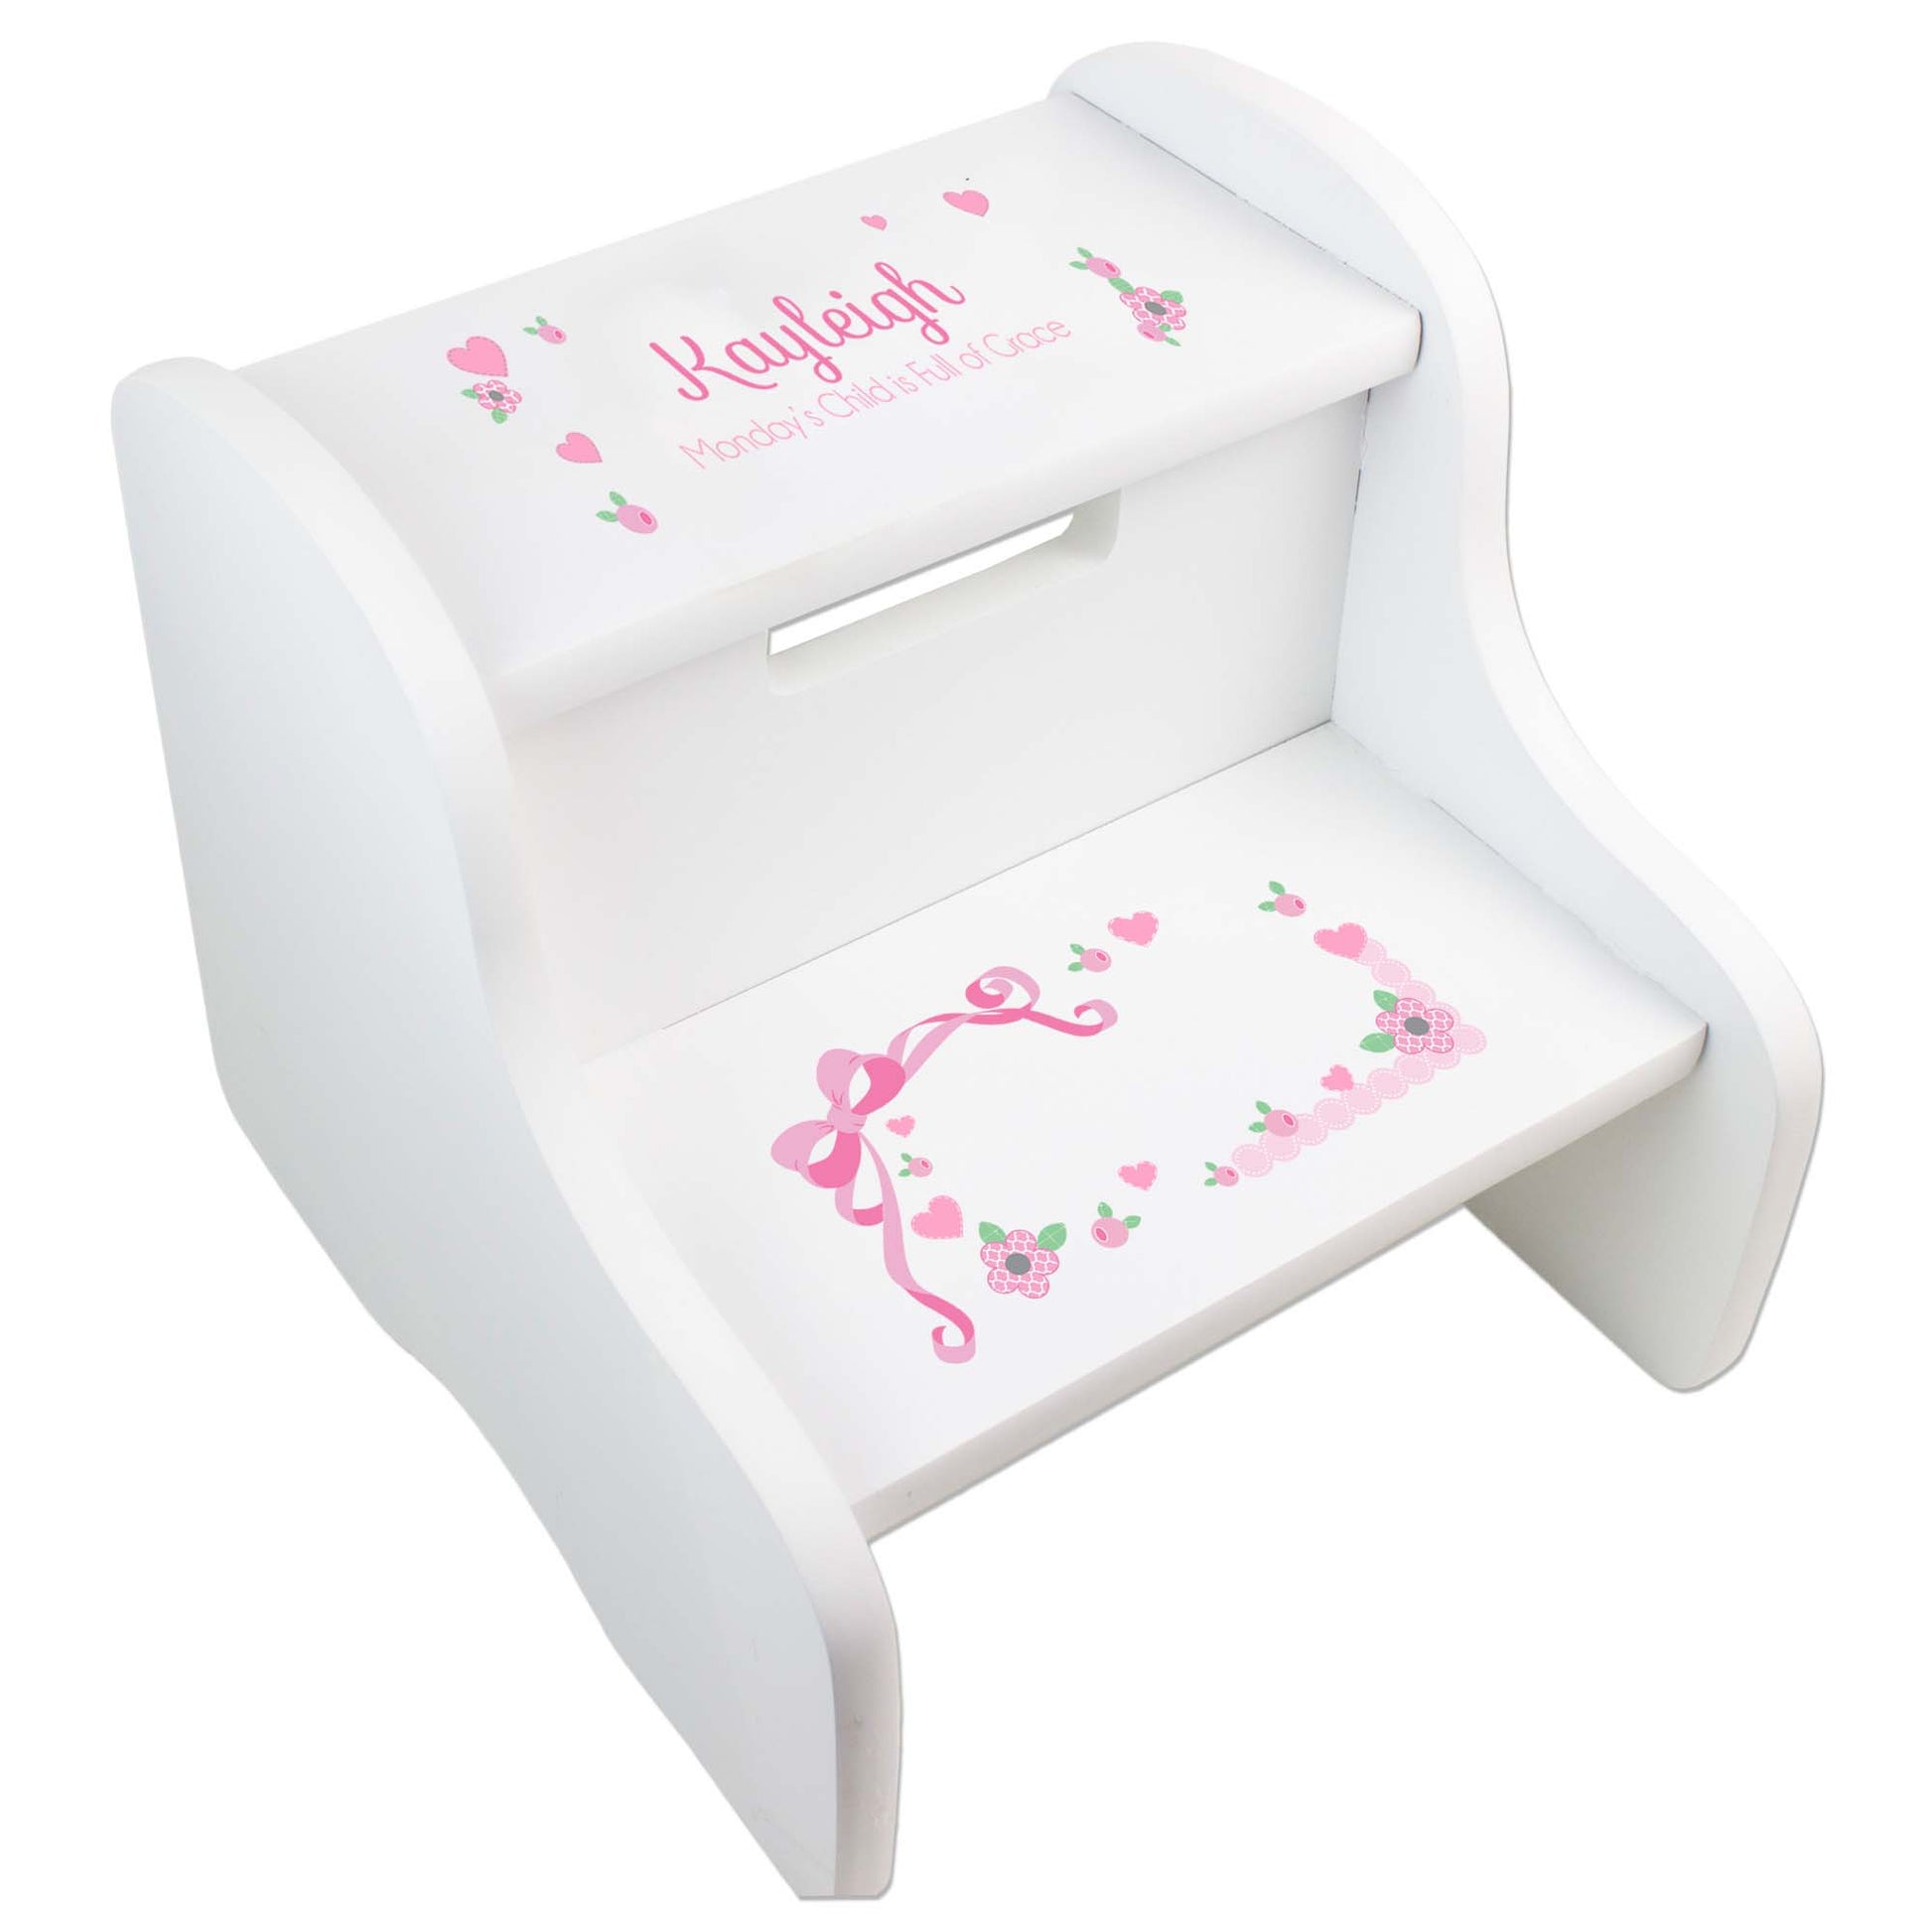 Personalized White Step Stool With Pink Bow Design